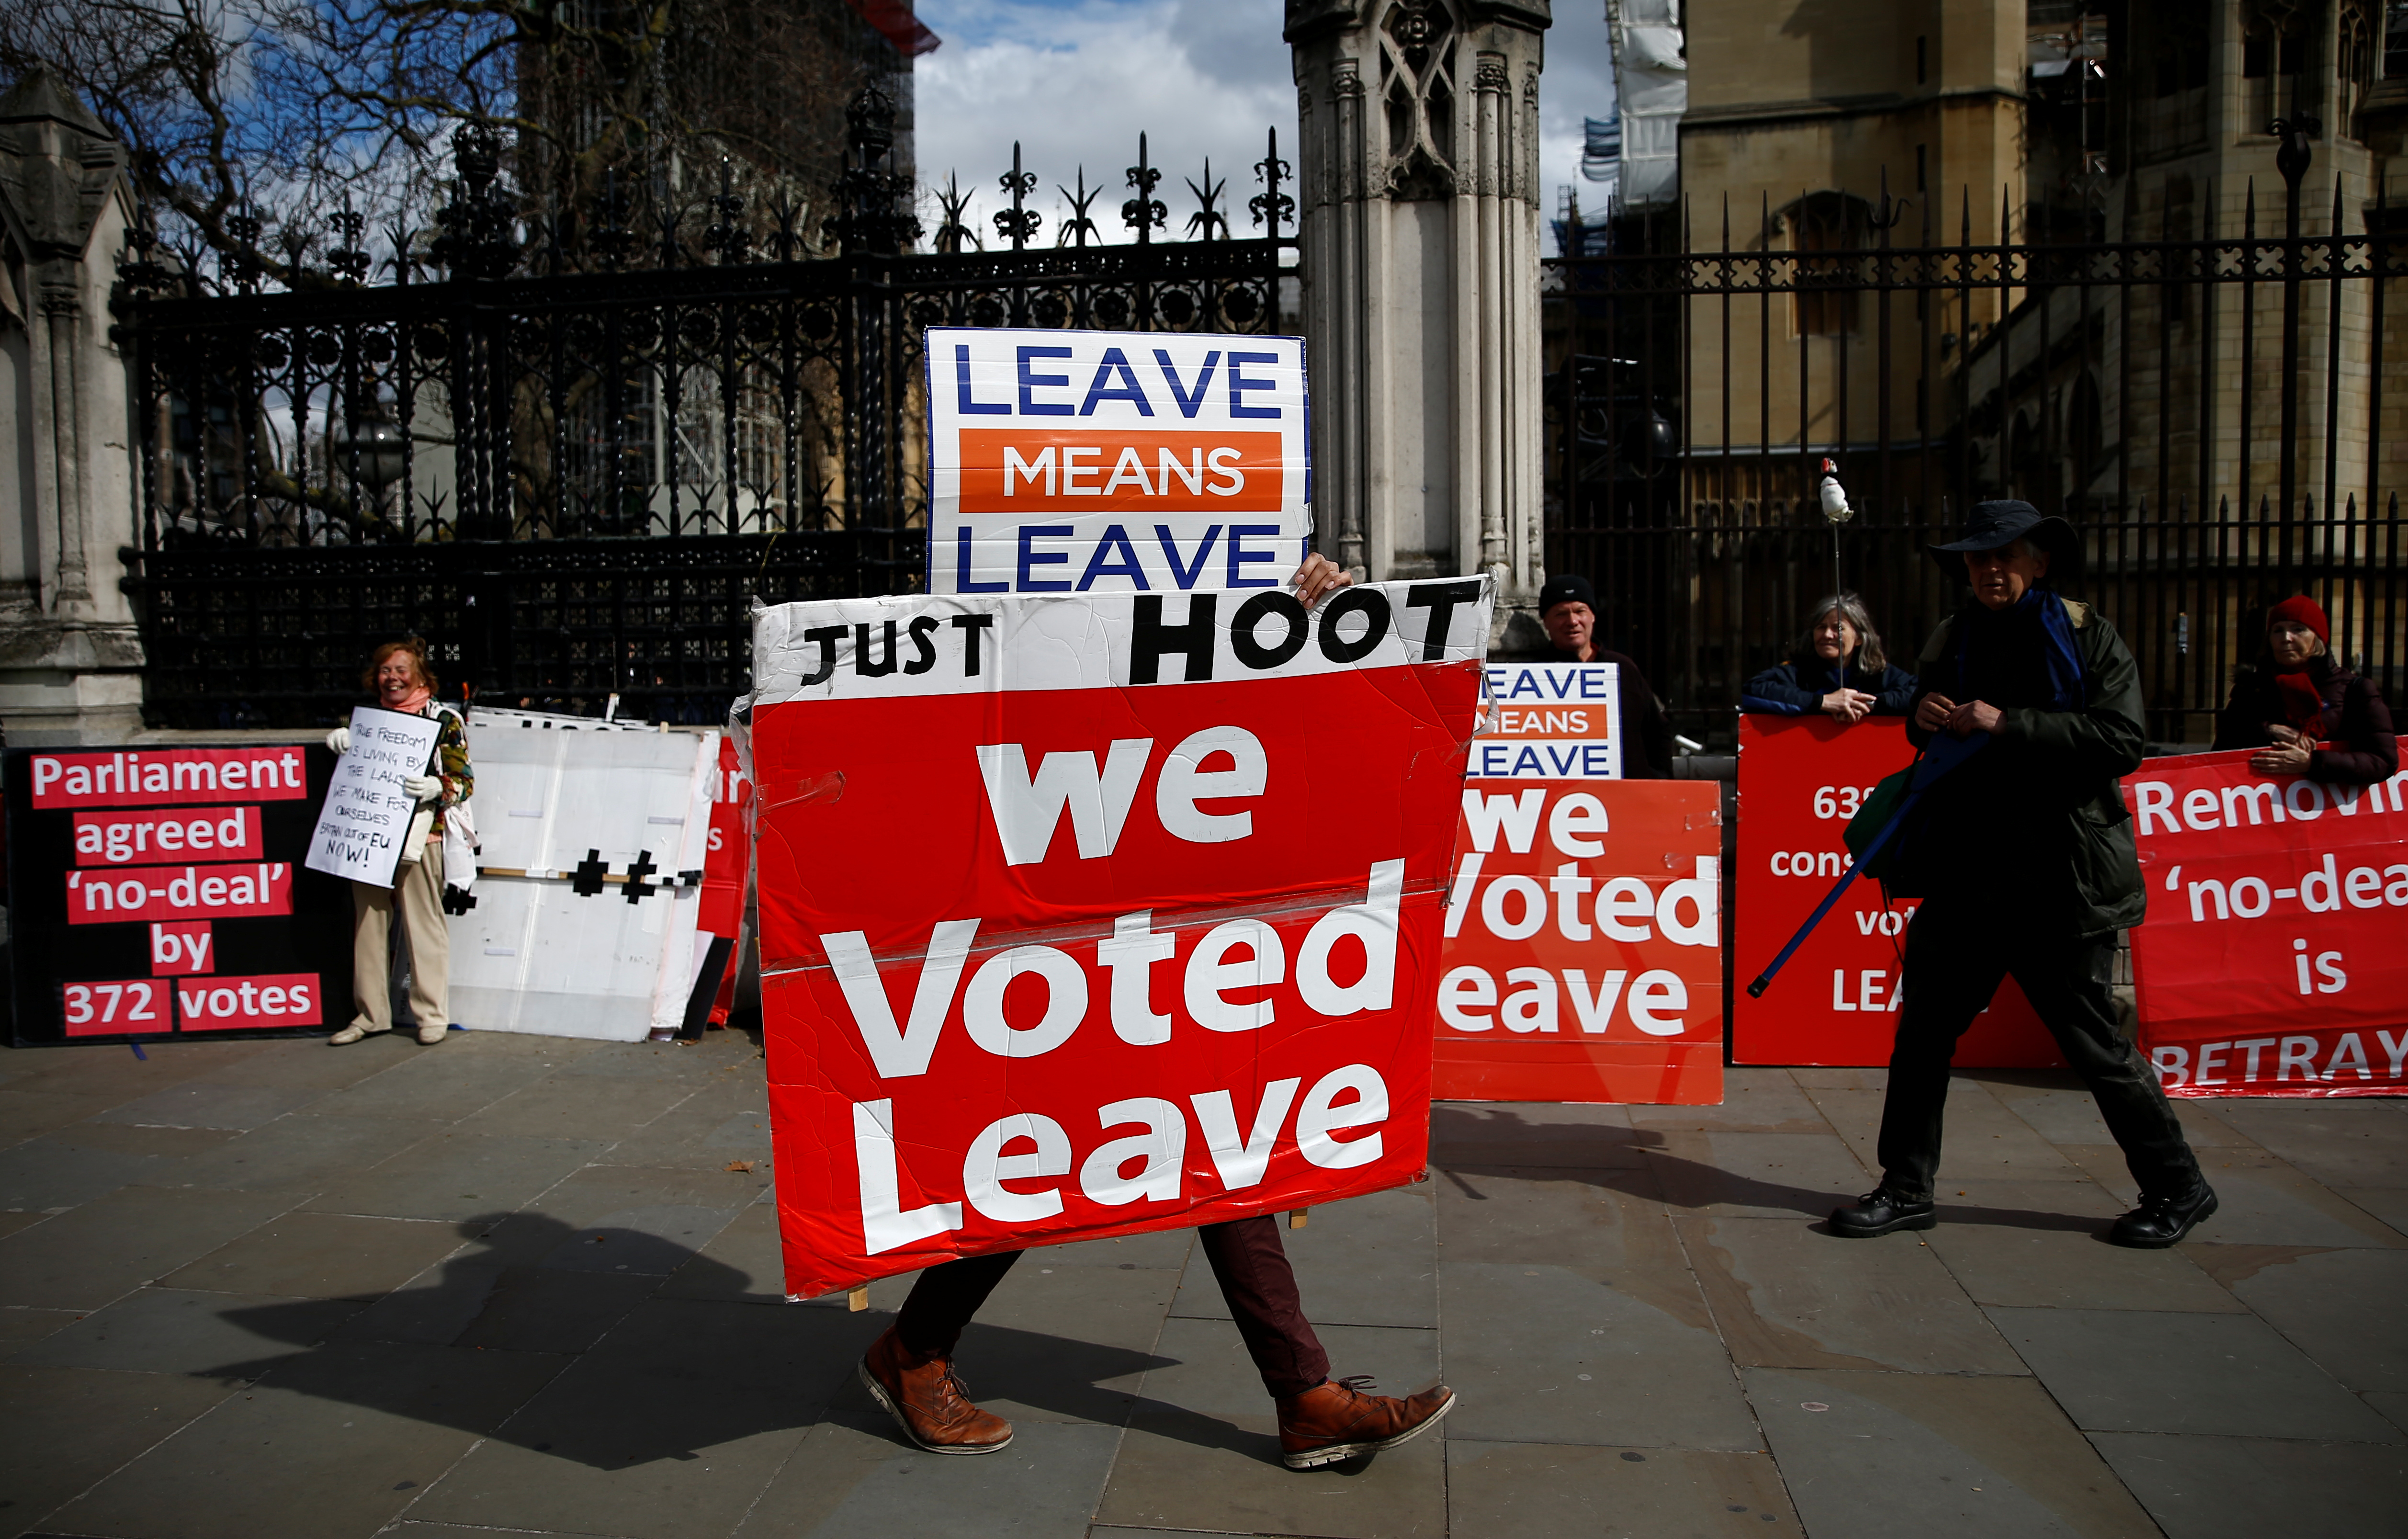 Brexit Endgame British Parliament Faces Naked Protestors A Leaky Roof 